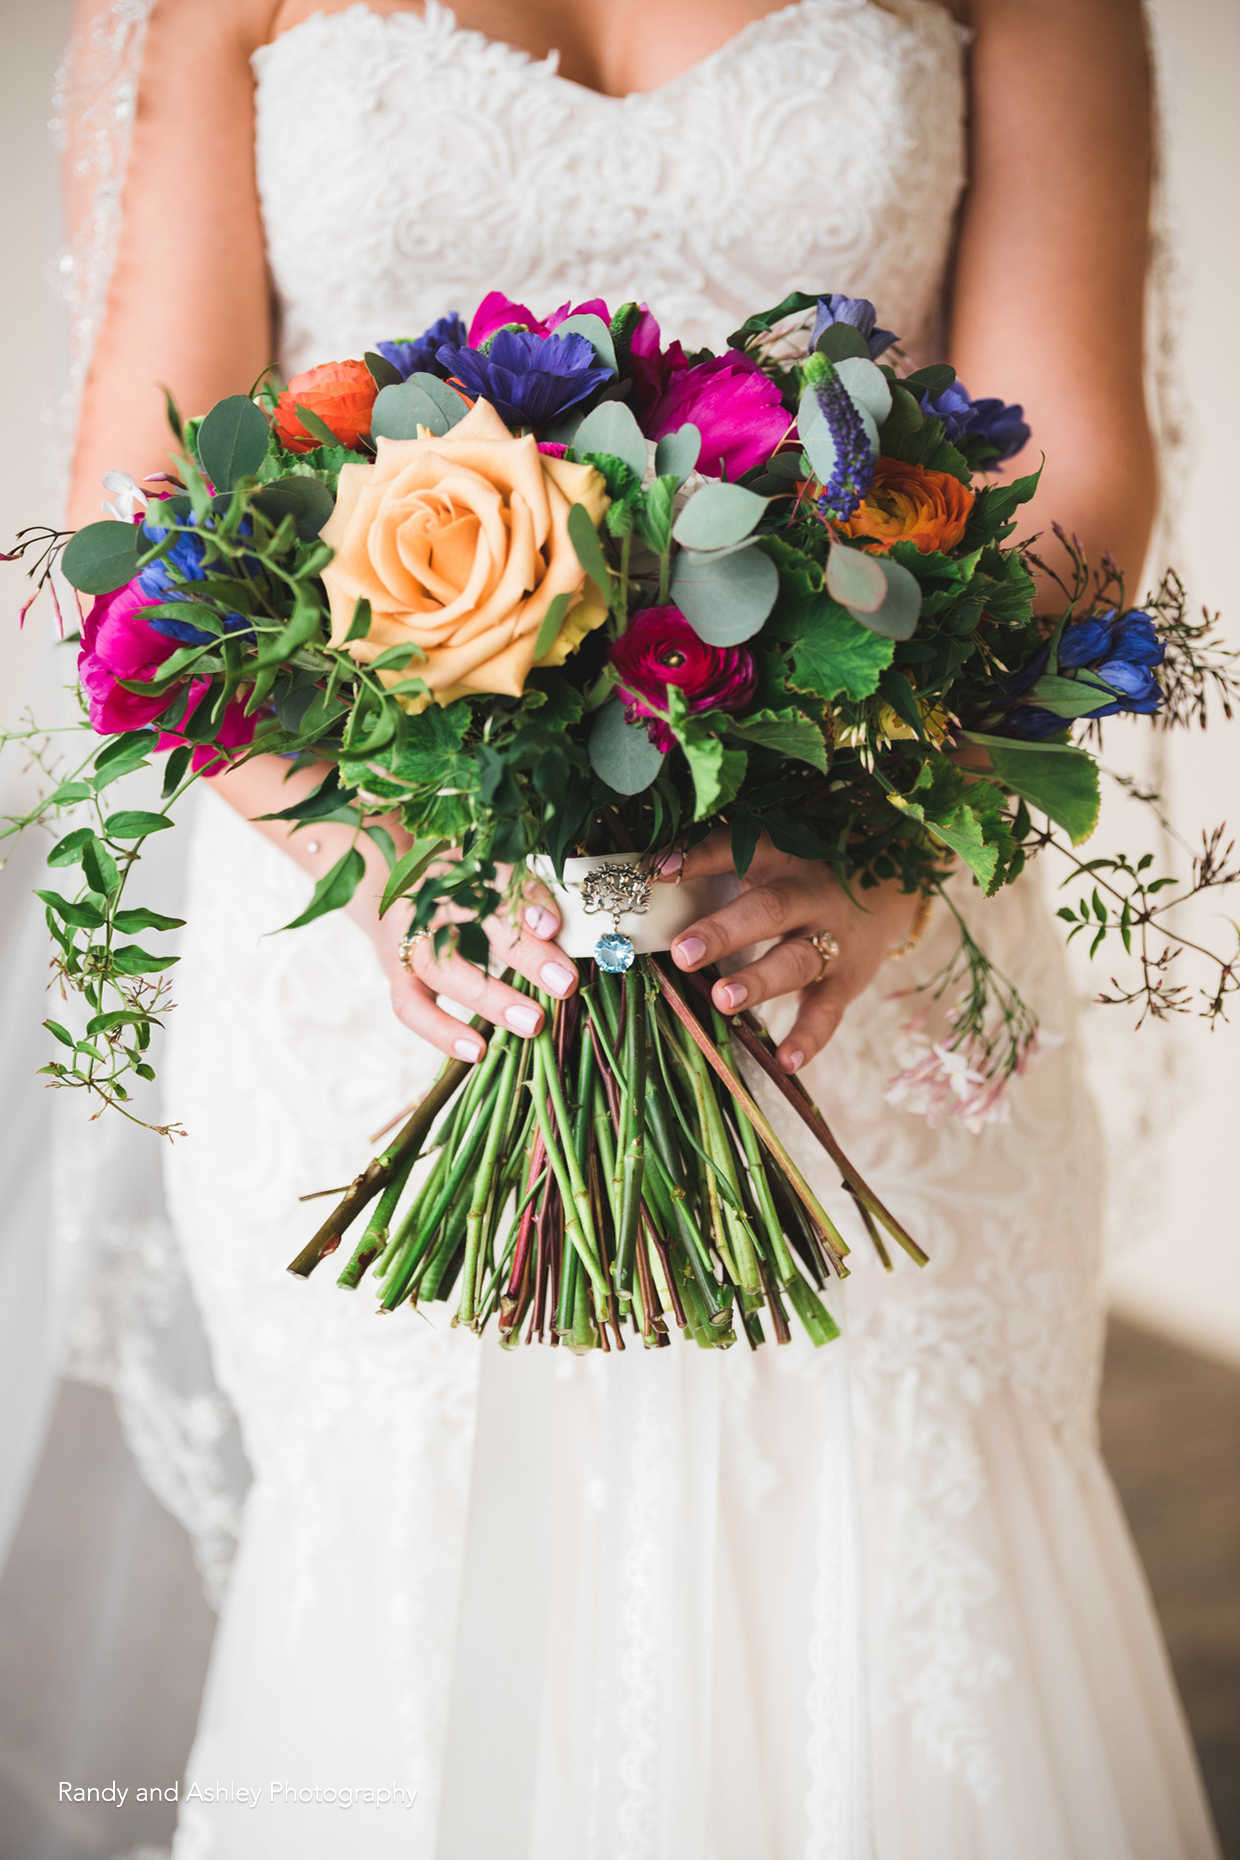 Stunning wedding bouquet at Casa Real at Ruby Hill Winery (www.casarealevents.com). Photo by: Randy and Ashley Photography. Bouquet by: Enchantment Floral